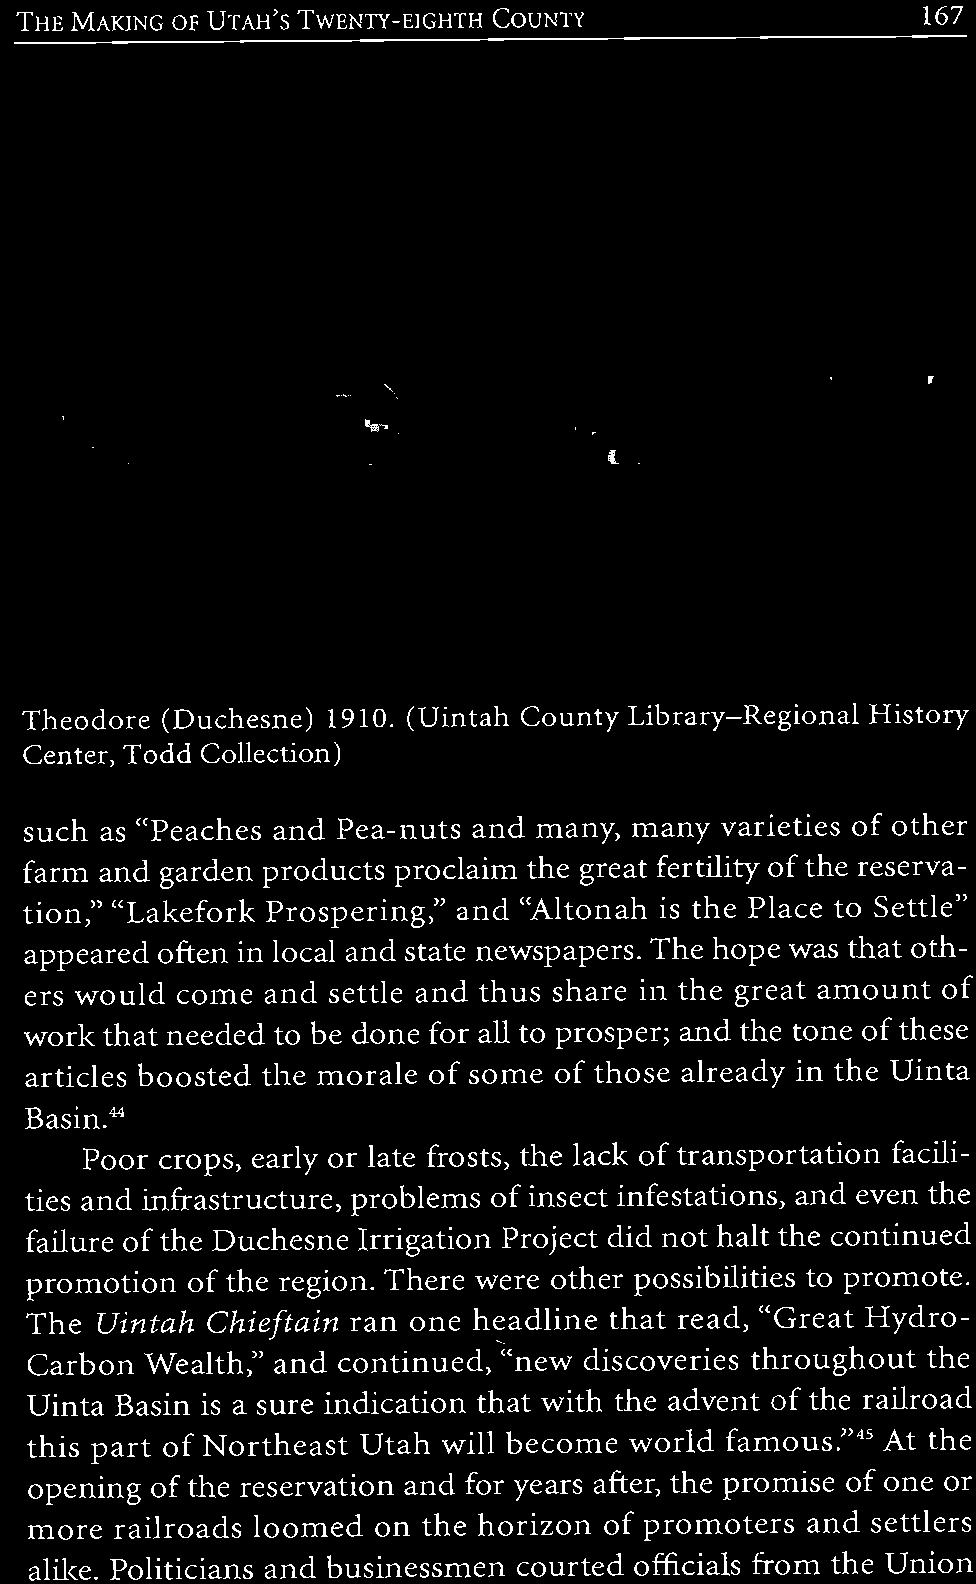 reservation," "Lakefork Prospering," and "Altonah is the Place to Settle" appeared often in local and state newspapers.